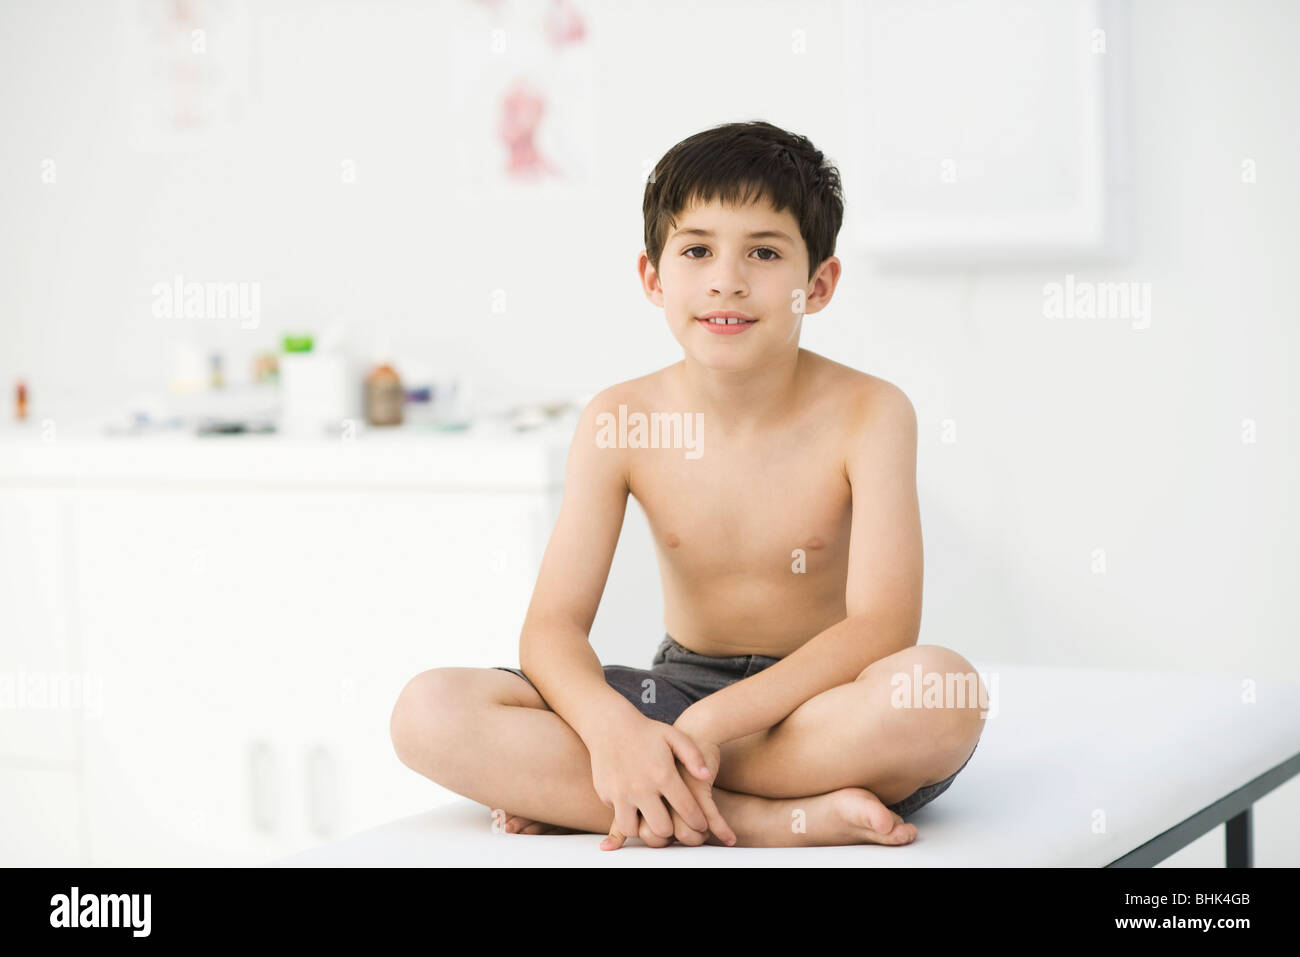 Boy sitting on examining table in doctor's office Stock Photo